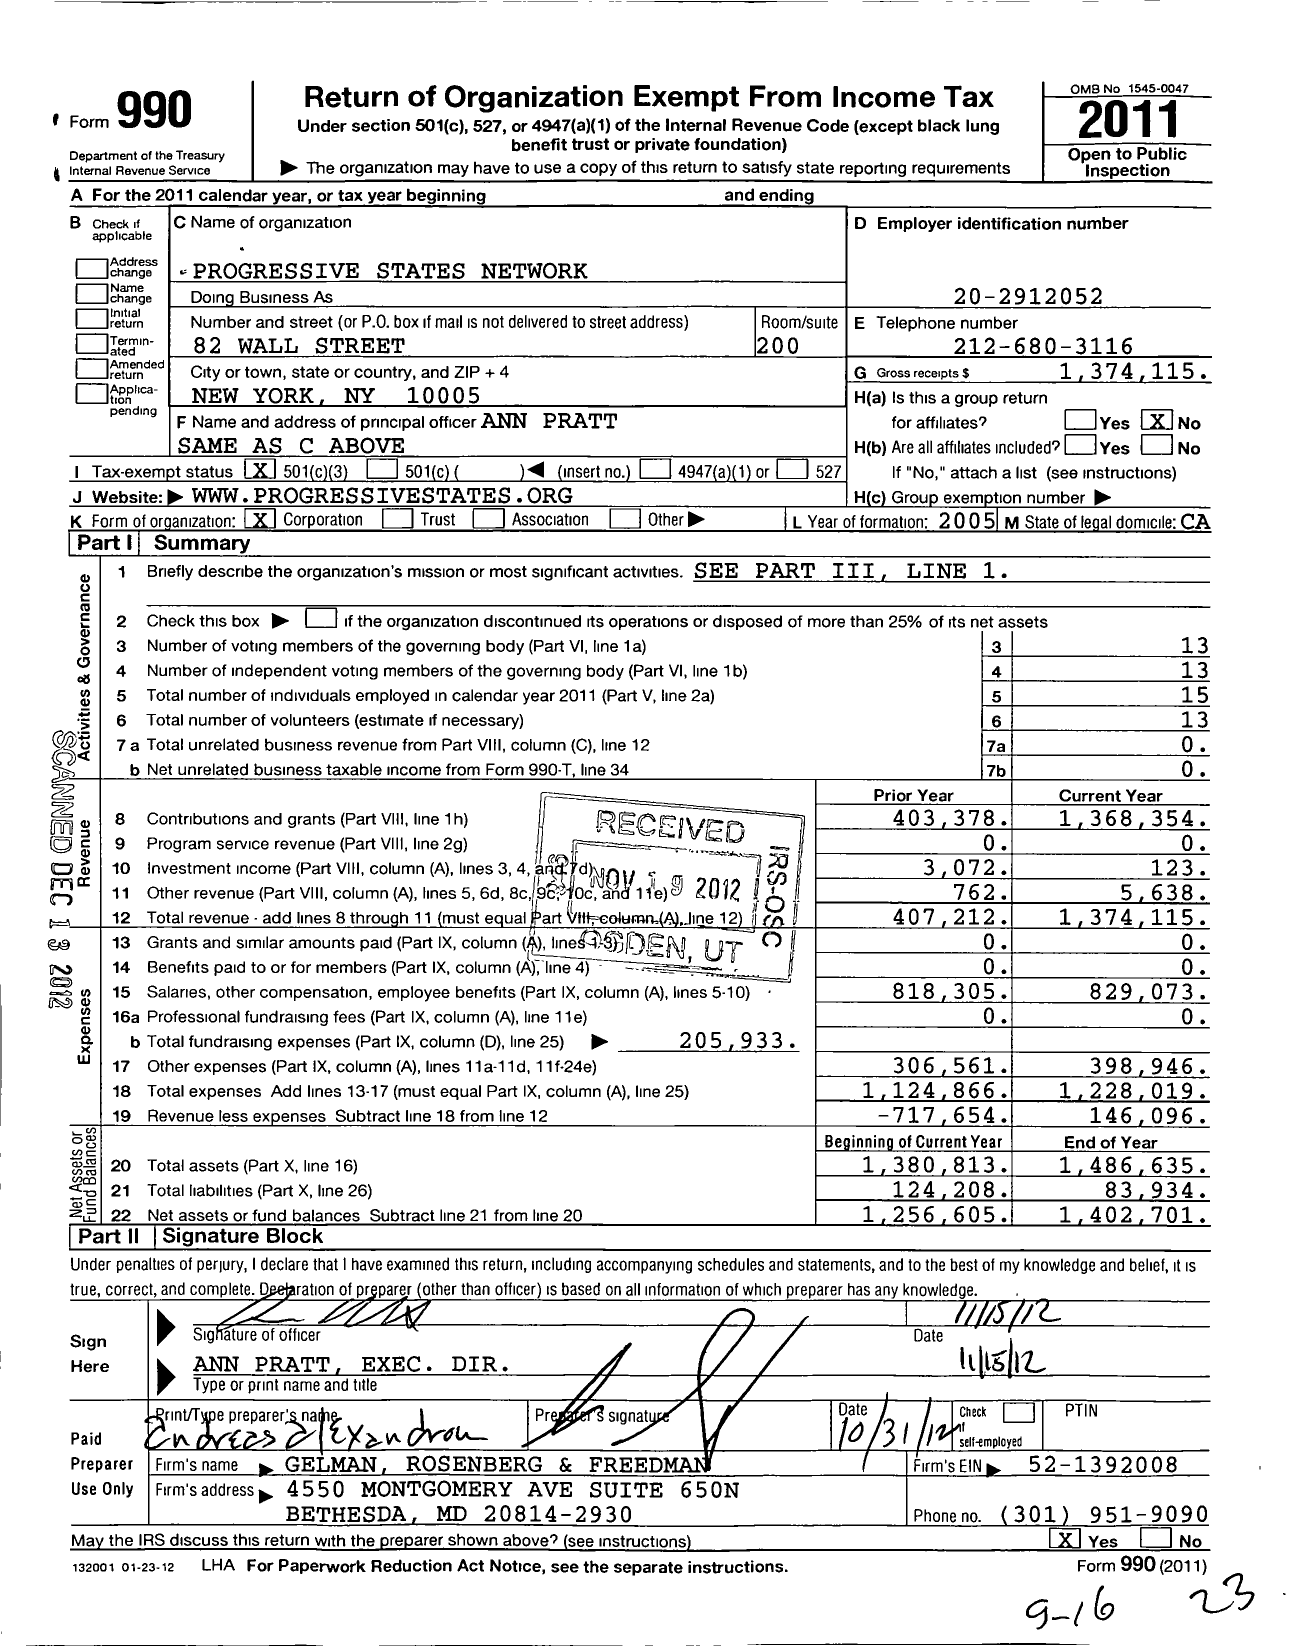 Image of first page of 2011 Form 990 for Progressive States Network